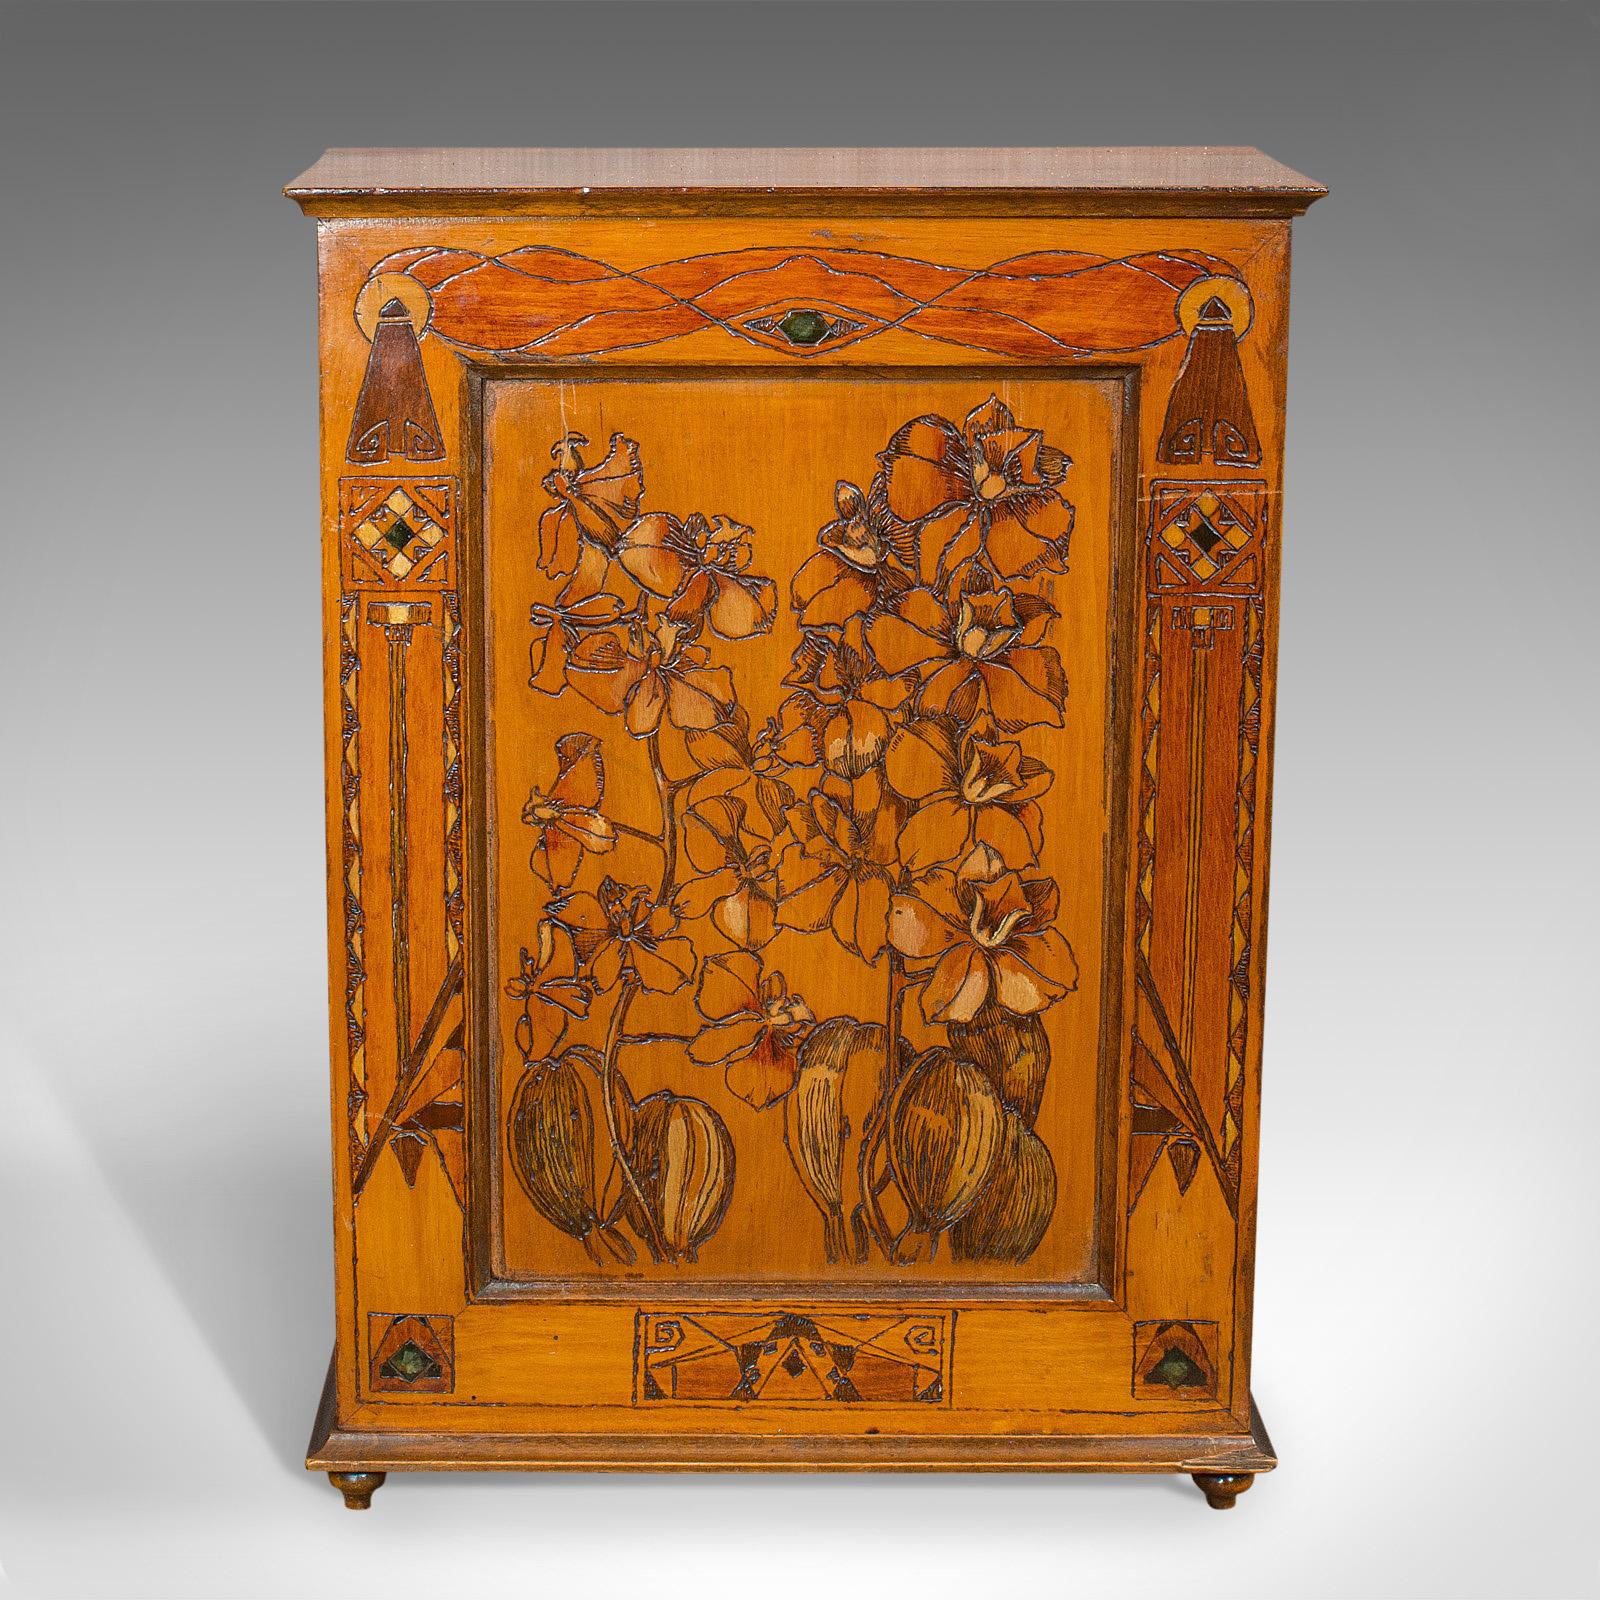 This is a small antique smoker's cabinet. An English, satinwood and pokerwork caddy in Art Nouveau taste, dating to the Victorian period, circa 1890.

Eye-catching storage for the gentleman smoker
Displaying a desirable aged patina
Satinwood